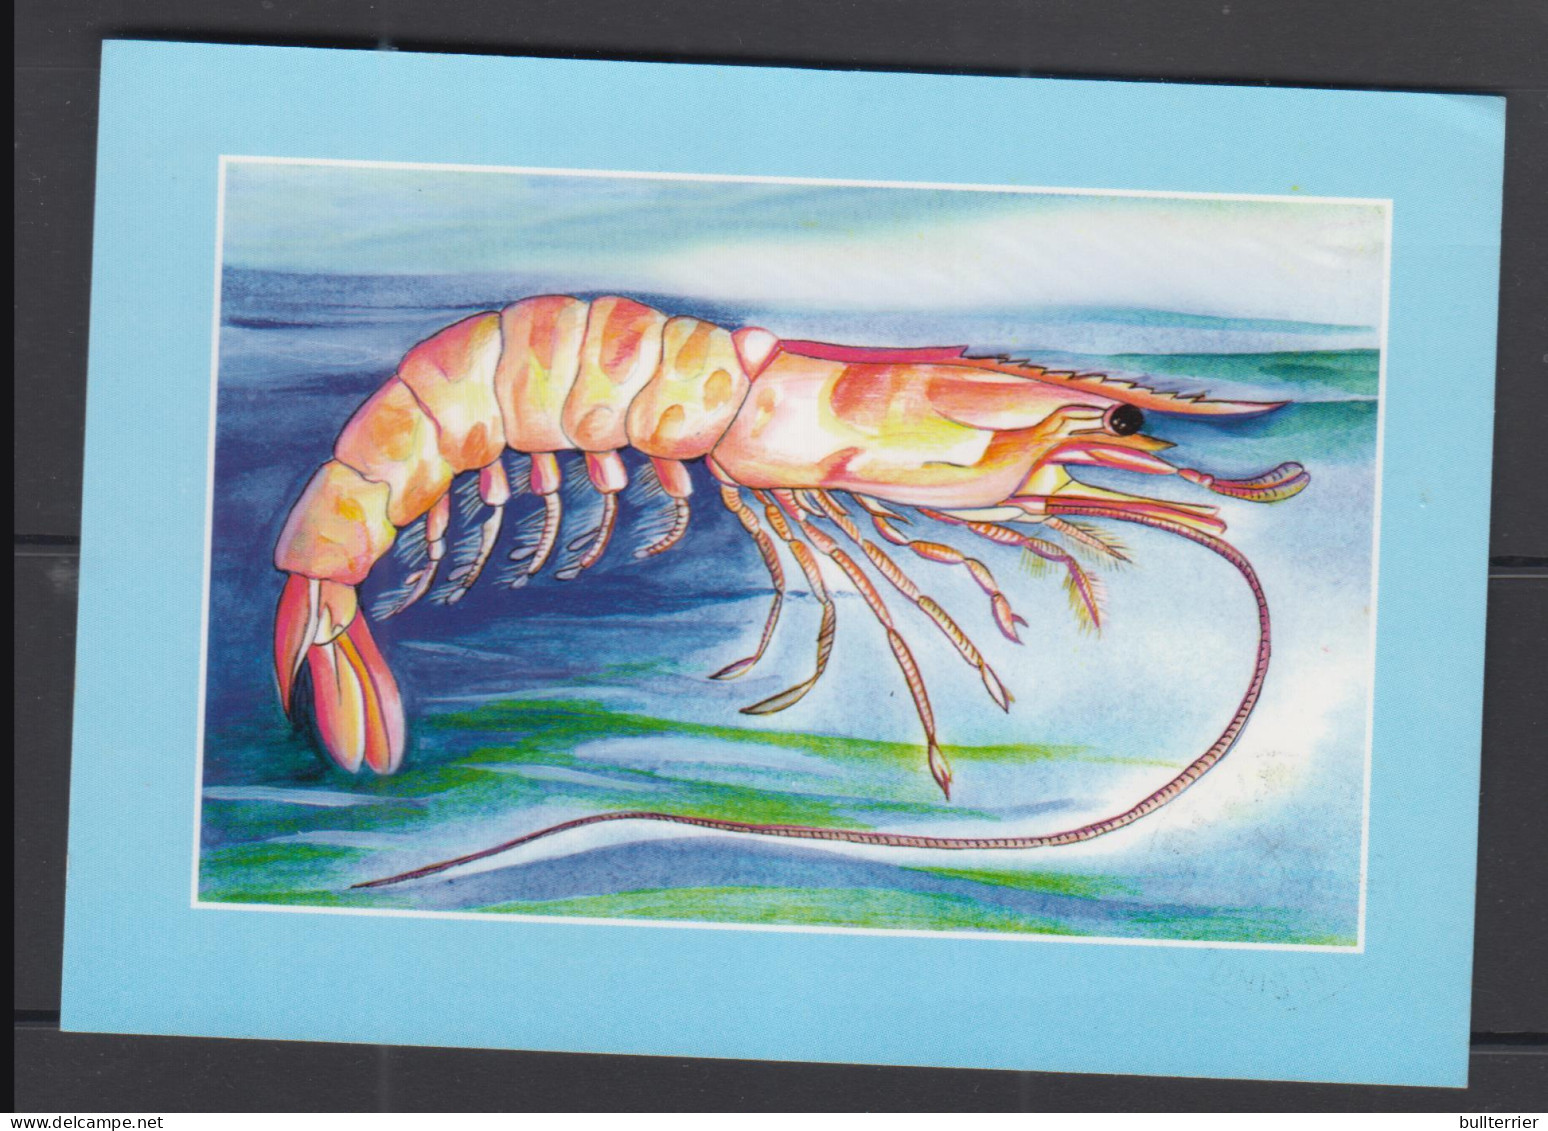 MARINE LIFE - TUNISIA - 1999 - POSTCARD TO  GERMANY WITH CRUSTACEANS SET OF 3 IMPERF - Schalentiere